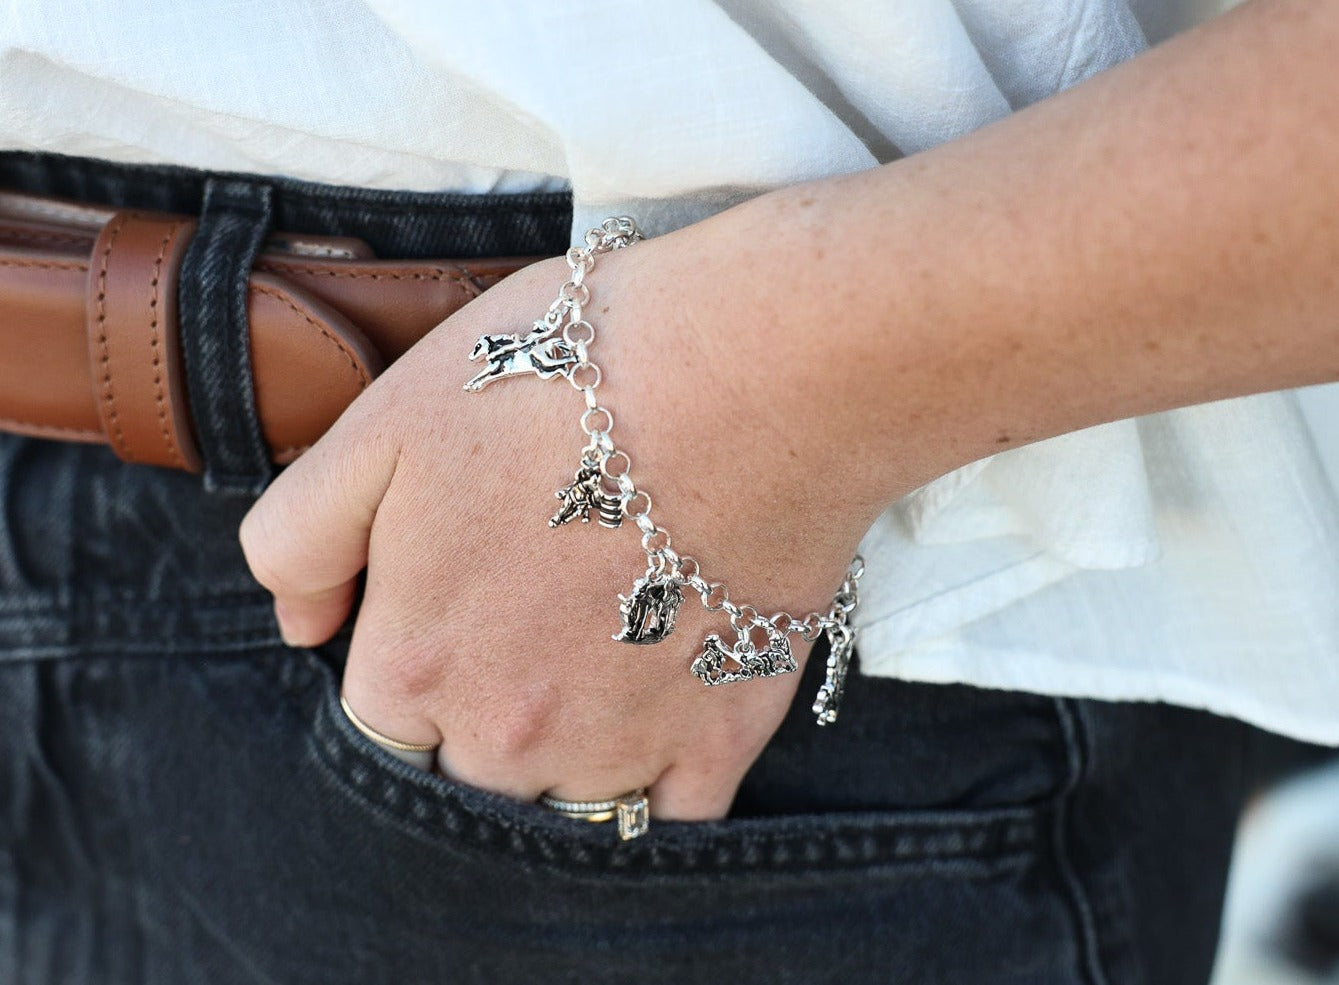 Montana Silversmiths Charms of Champions Rodeo Bracelet